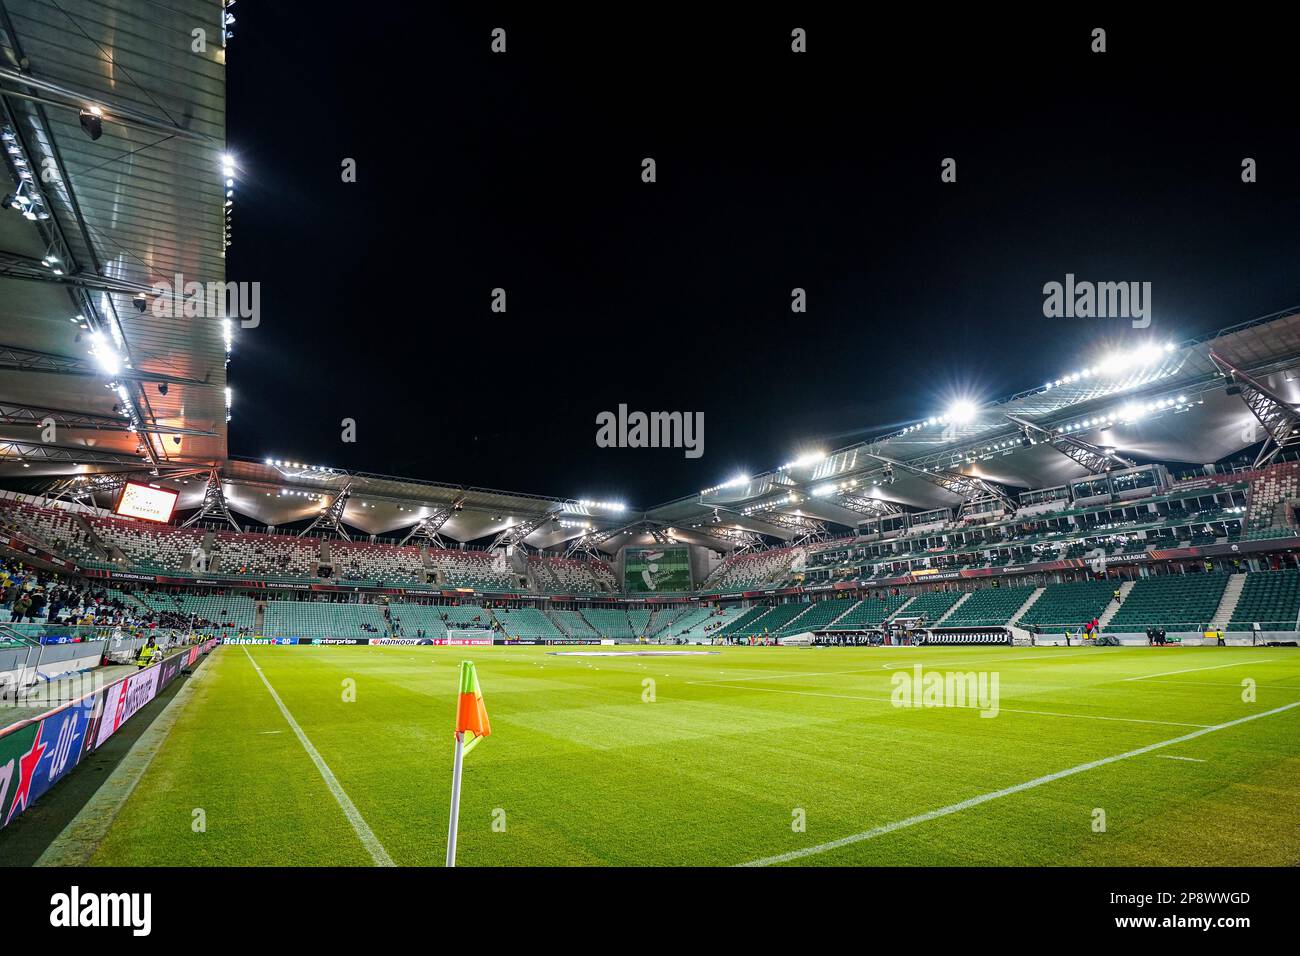 Warsaw - Overview of the stadium during the match between Shakhtar Donetsk v Feyenoord at Stadion Wojska Polskiego on 9 March 2023 in Warsaw, Poland. (Box to Box Pictures/Yannick Verhoeven) Stock Photo